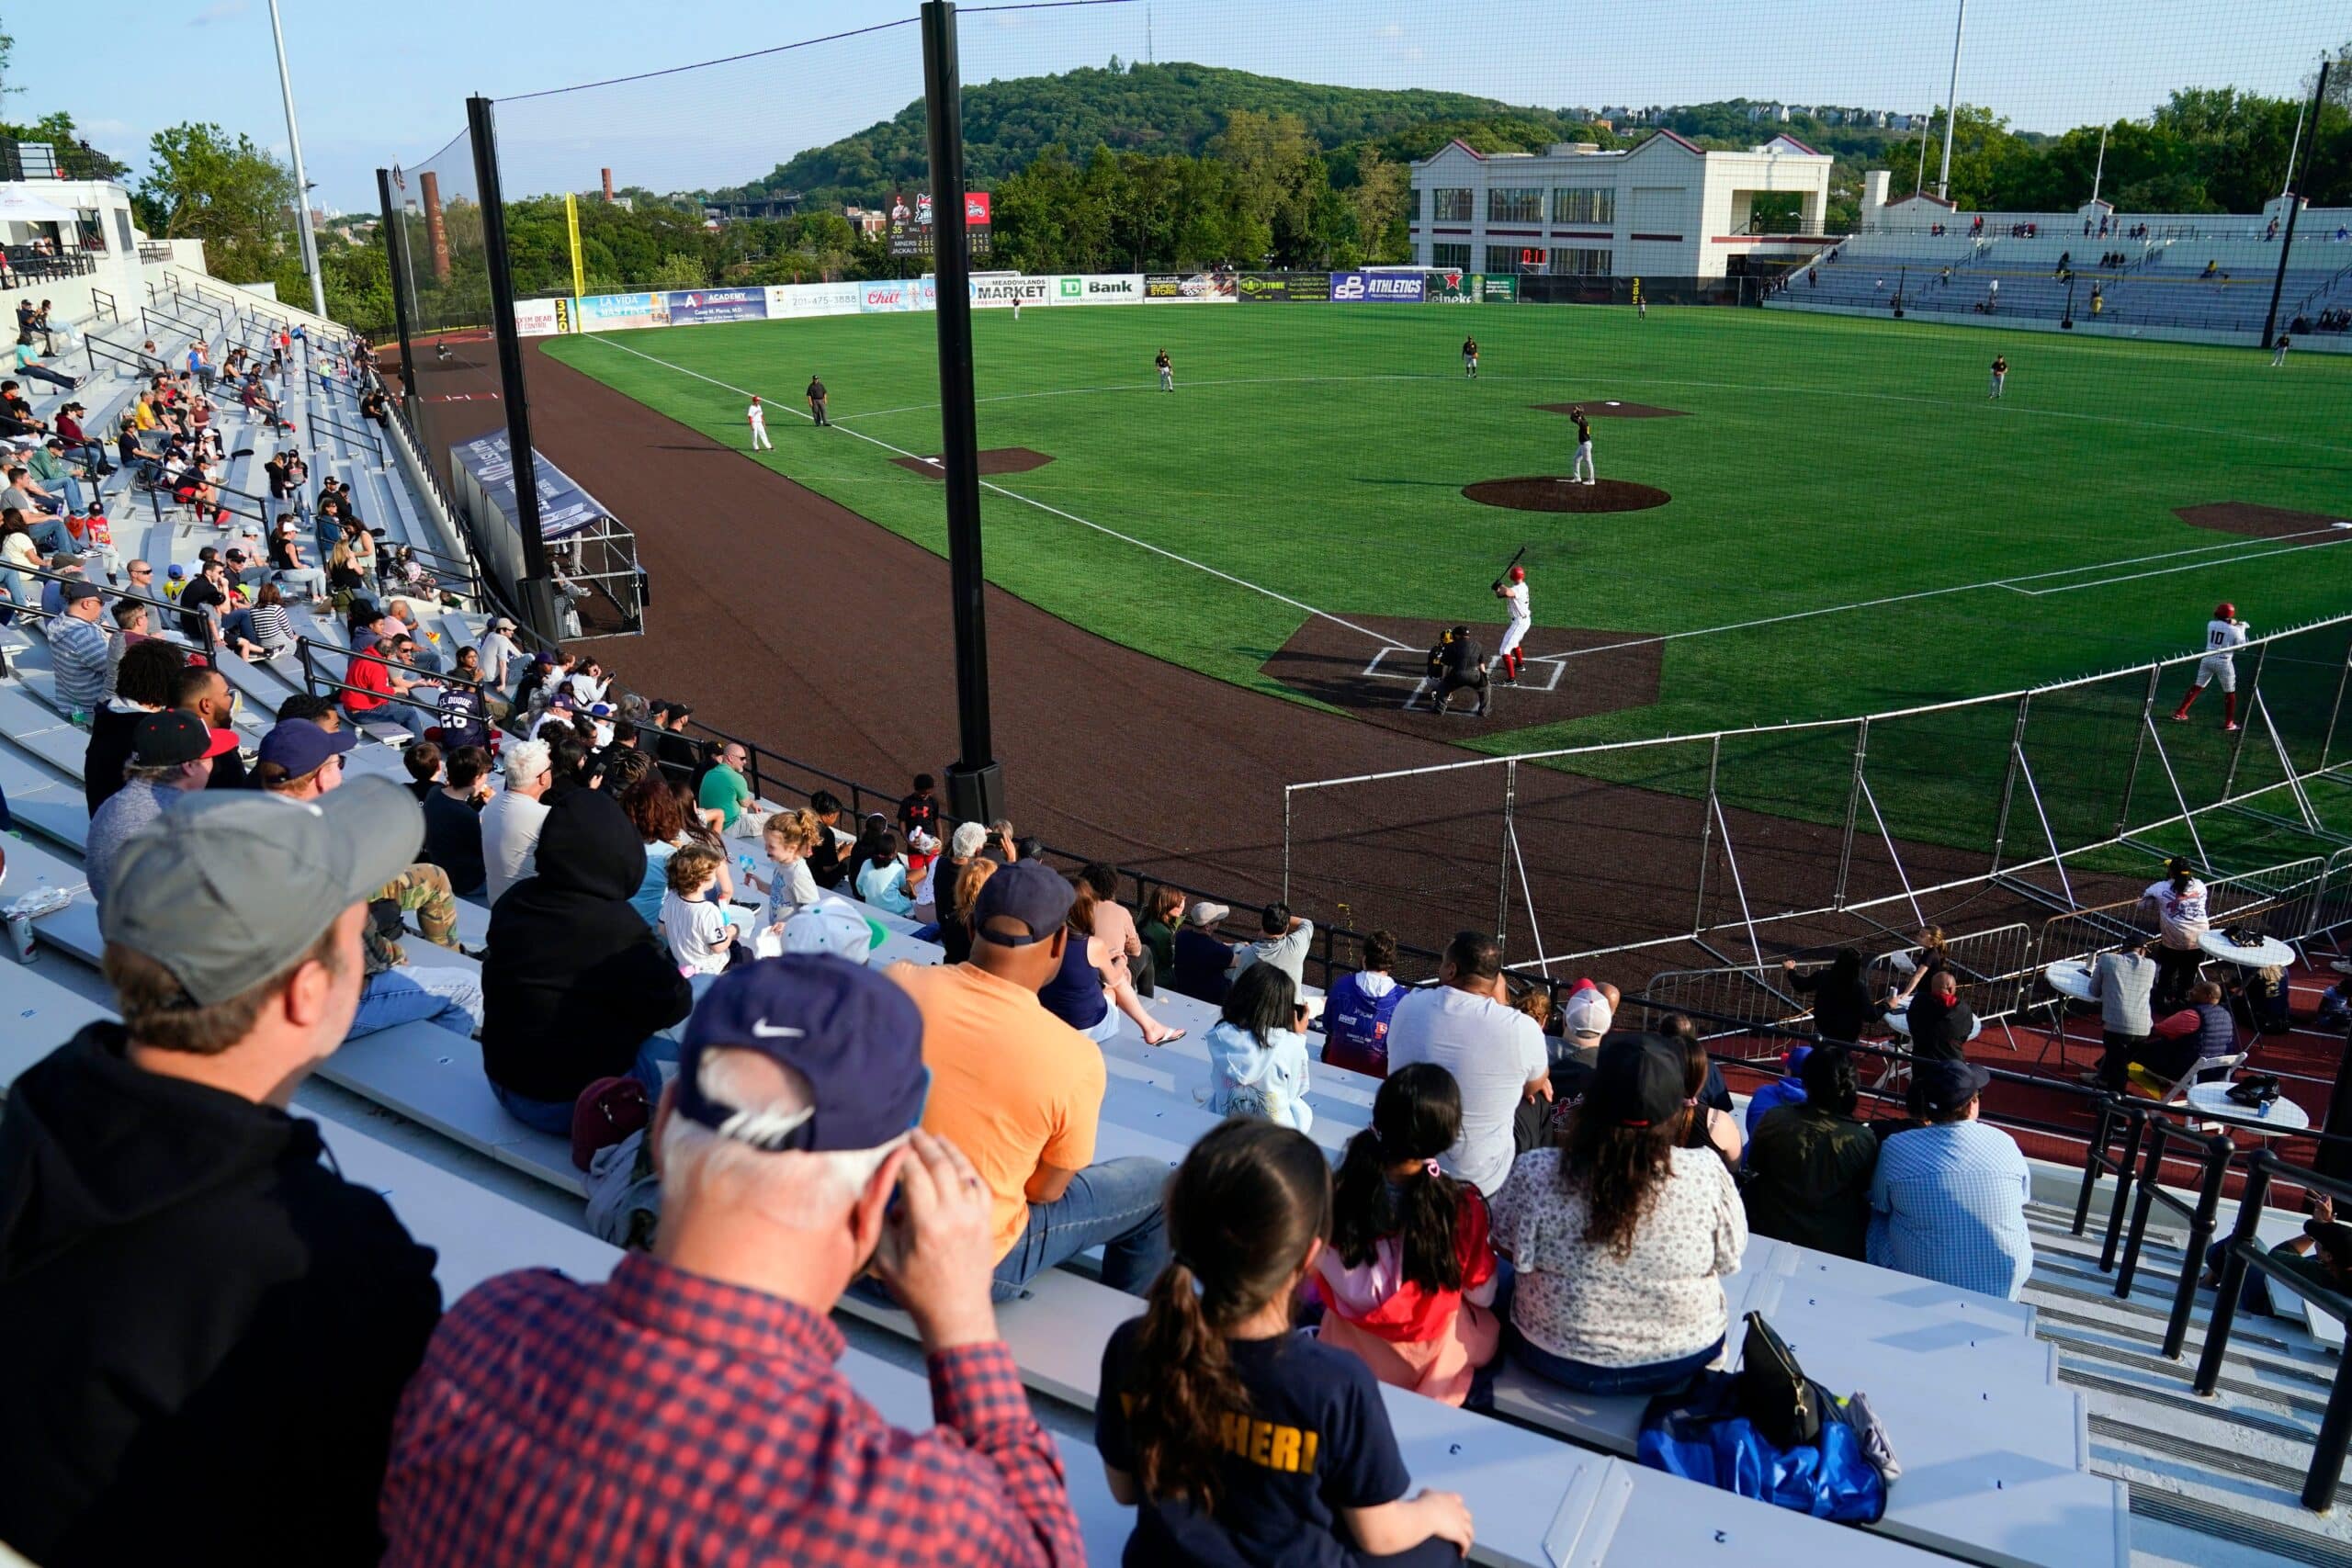 Hinchliffe Stadium, built in 1932, is one of the last surviving Negro League stadiums.